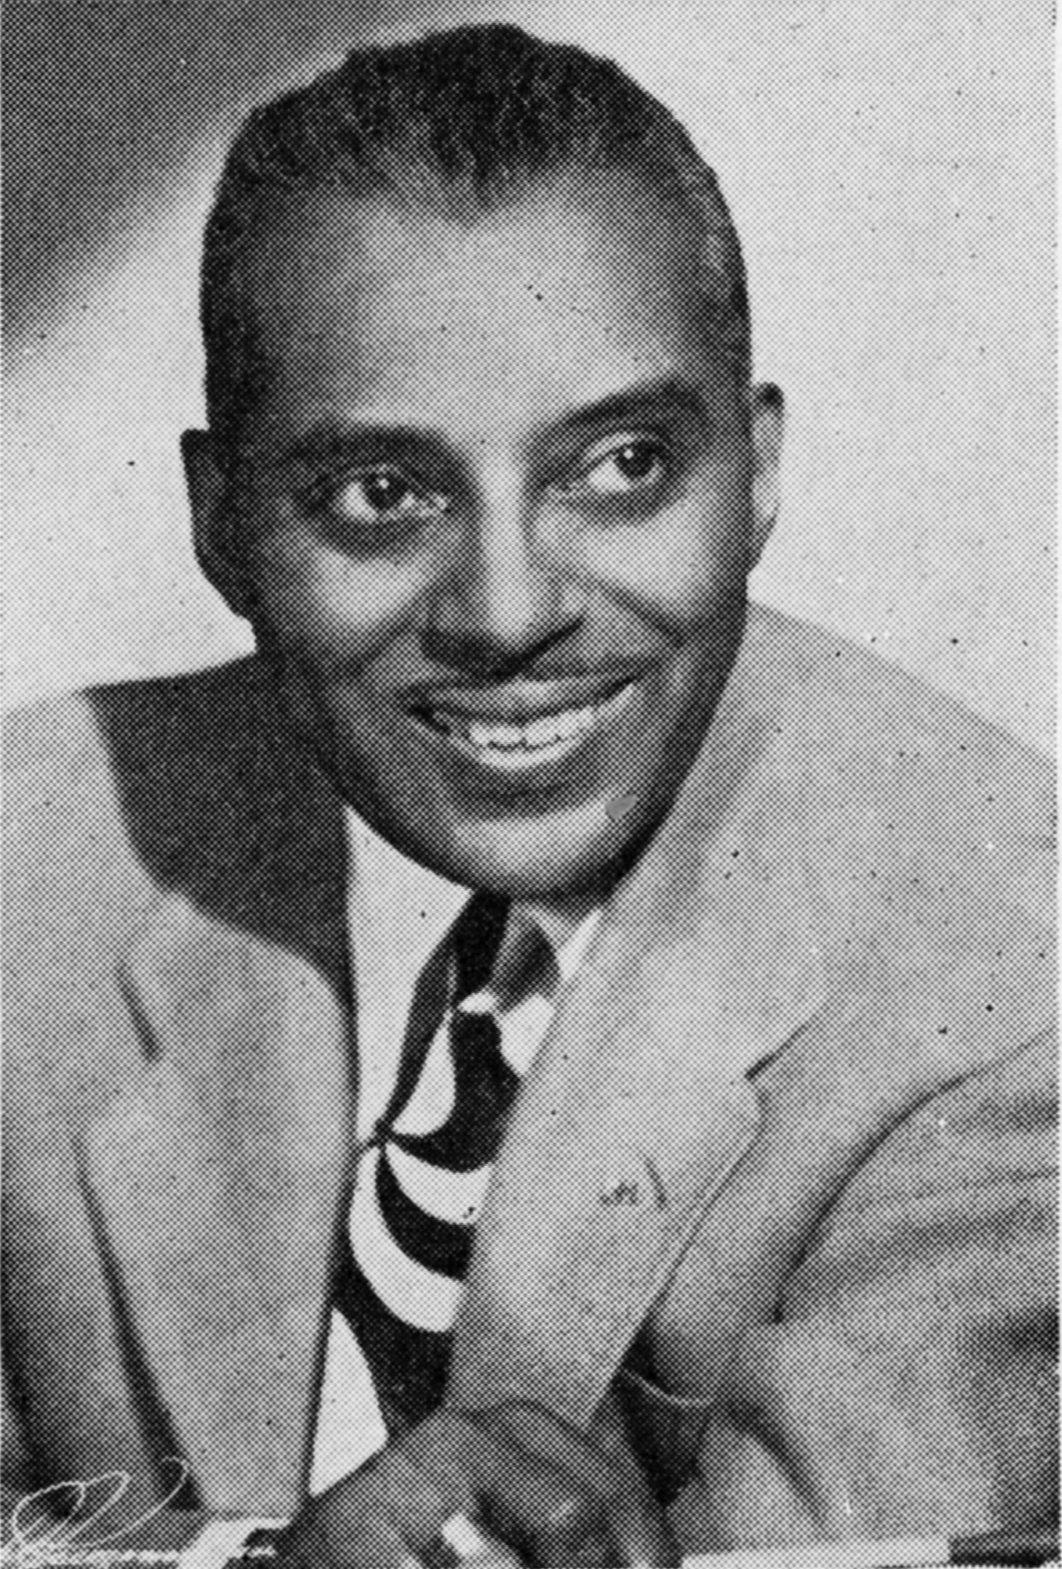 photograph of Noble Sissle